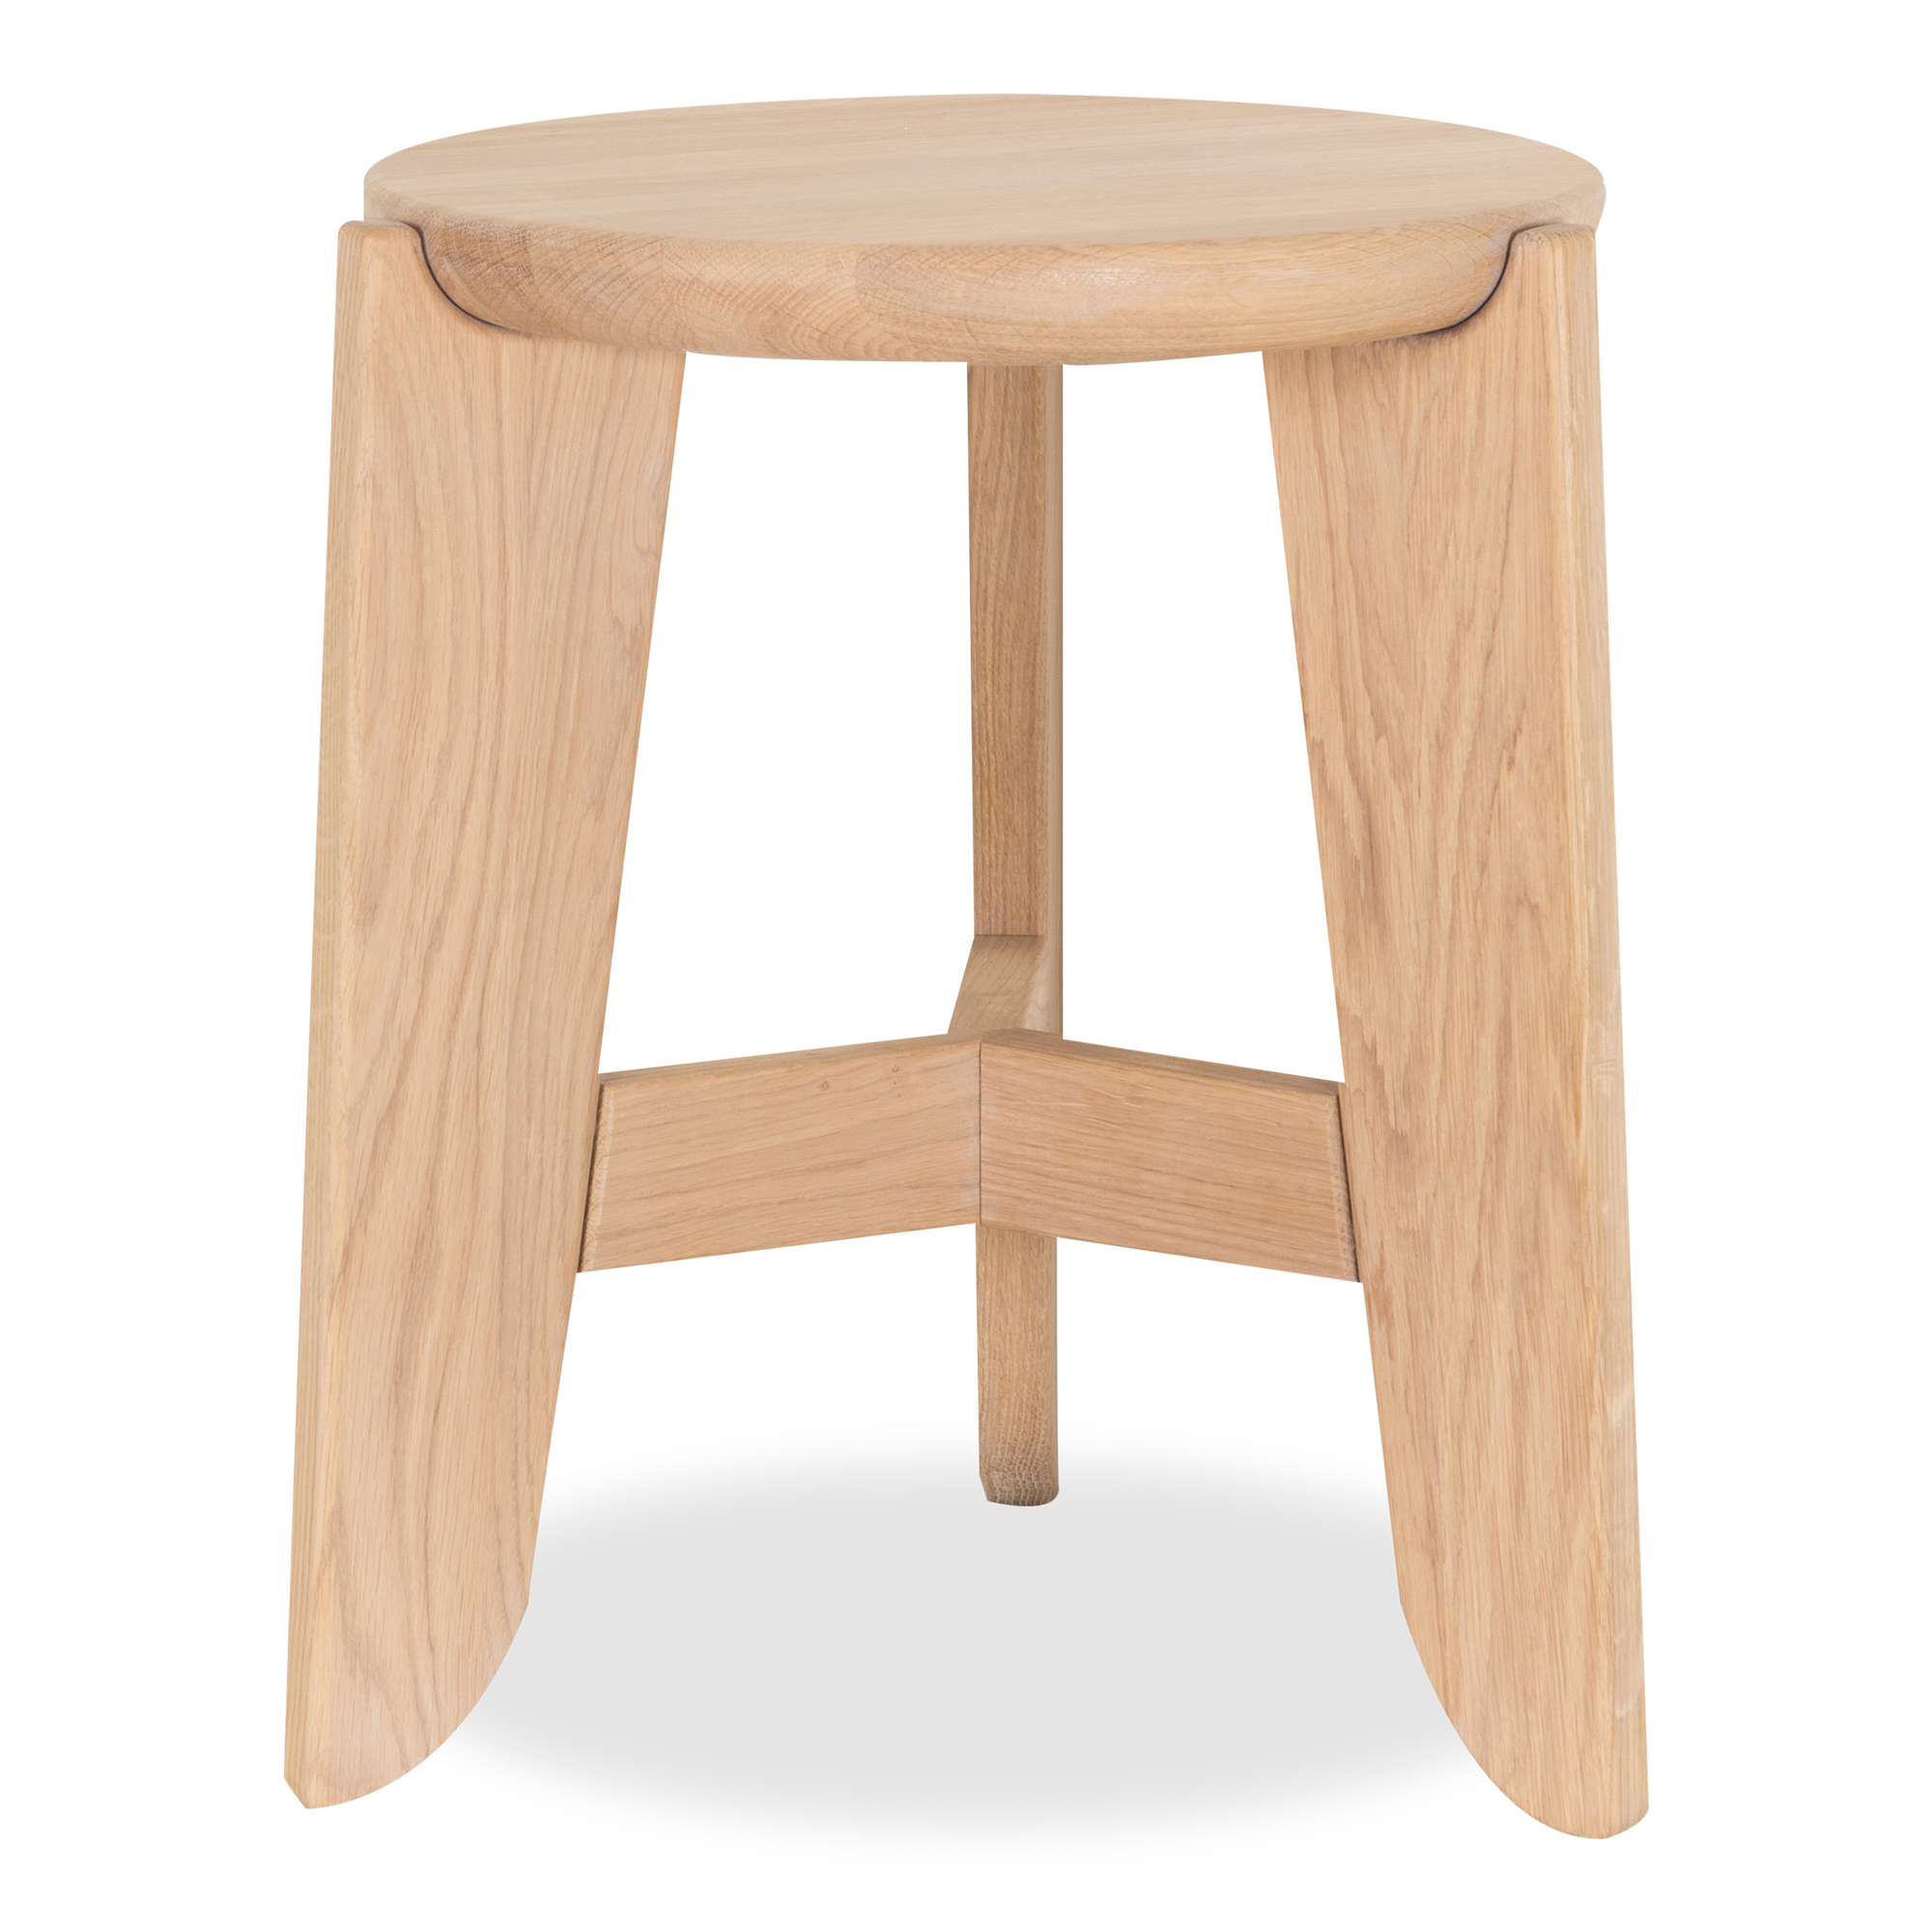 This stool is solidly constructed and bold with rounded edges and shapes that give it a modern appearance.